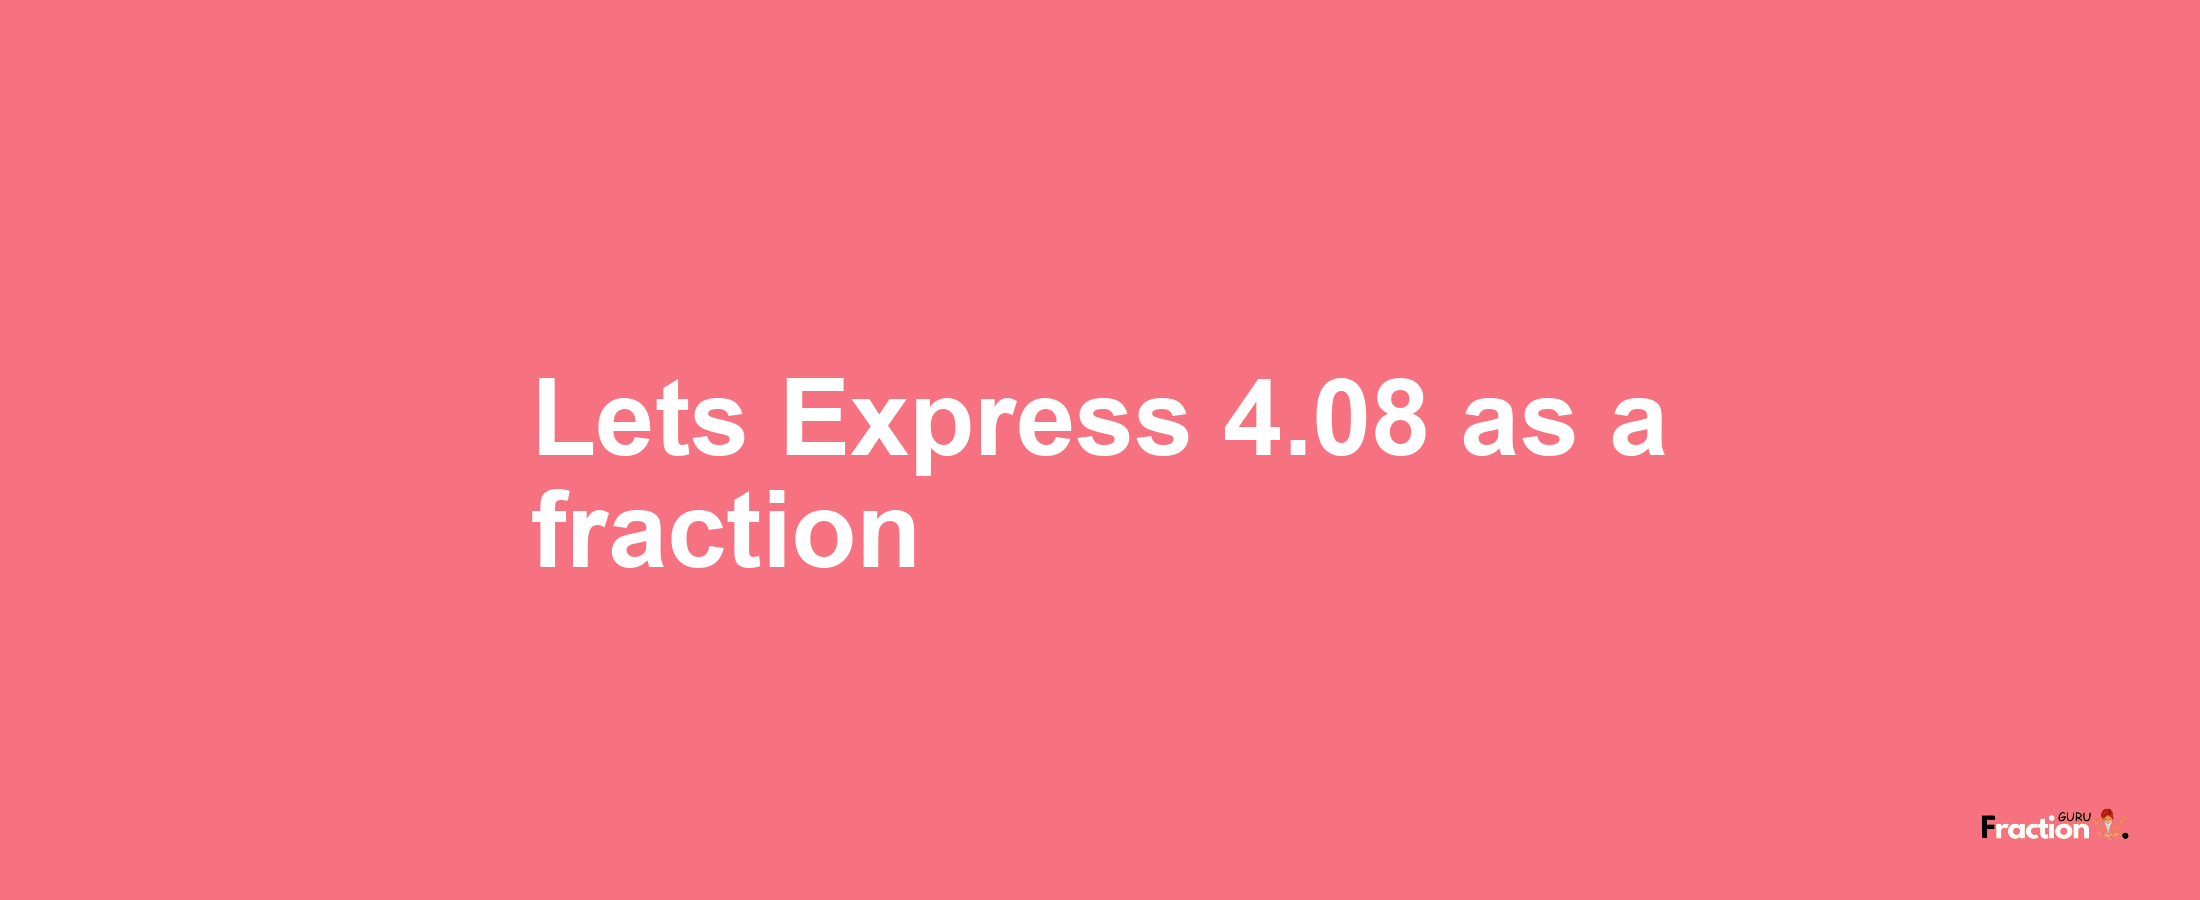 Lets Express 4.08 as afraction